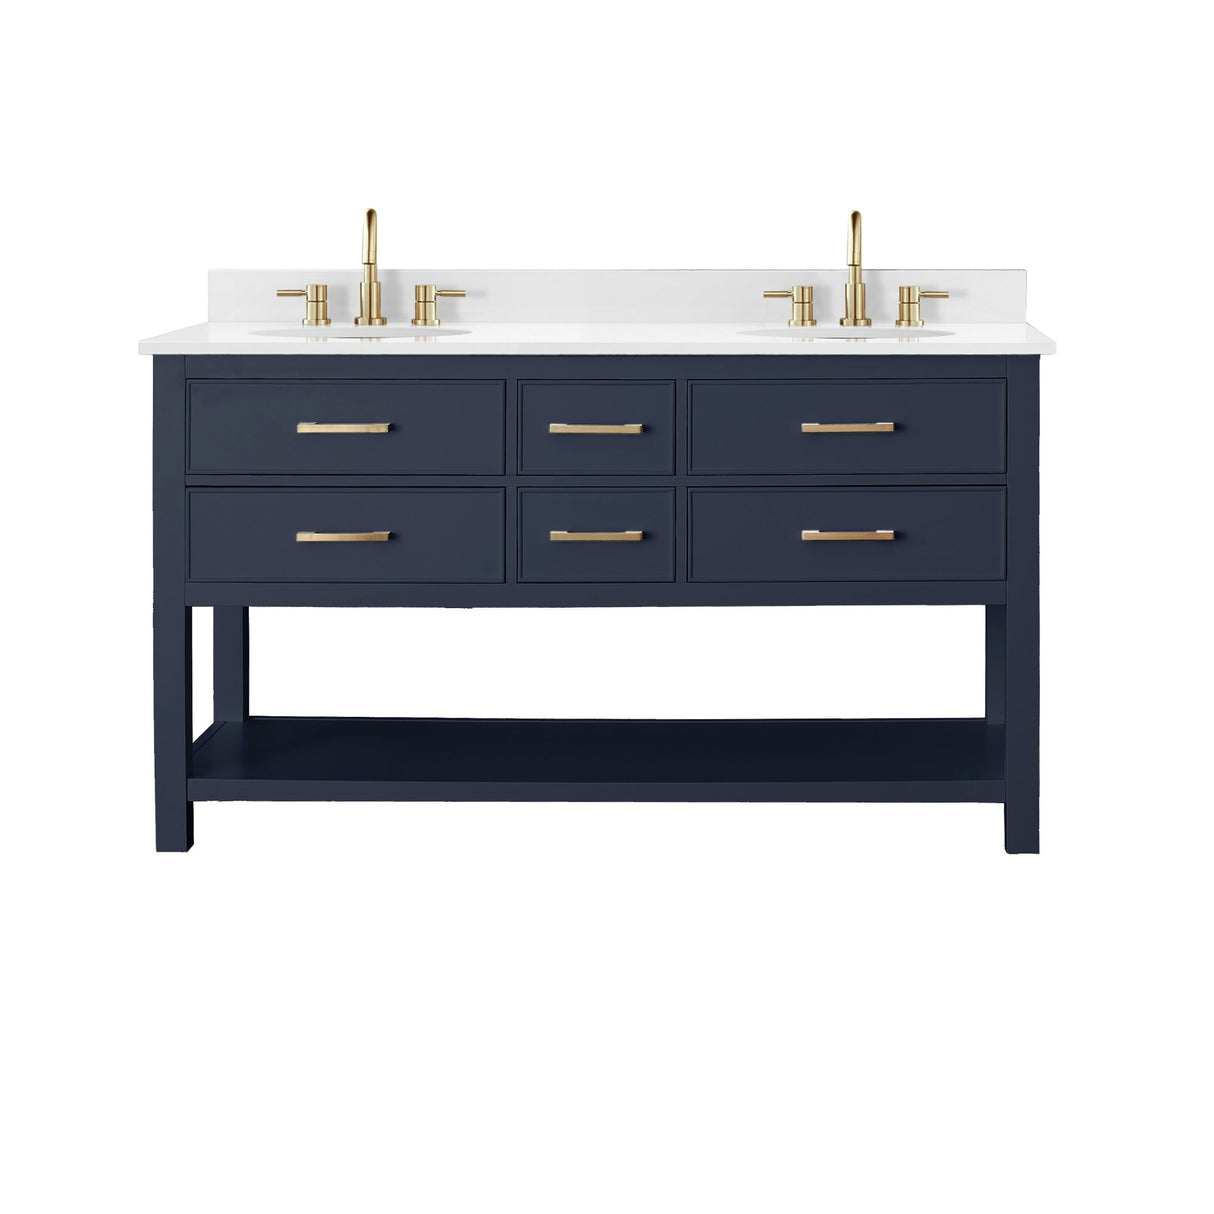 Avanity Brooks 61 in. Double Vanity in Navy Blue finish with Engineered White Stone Top